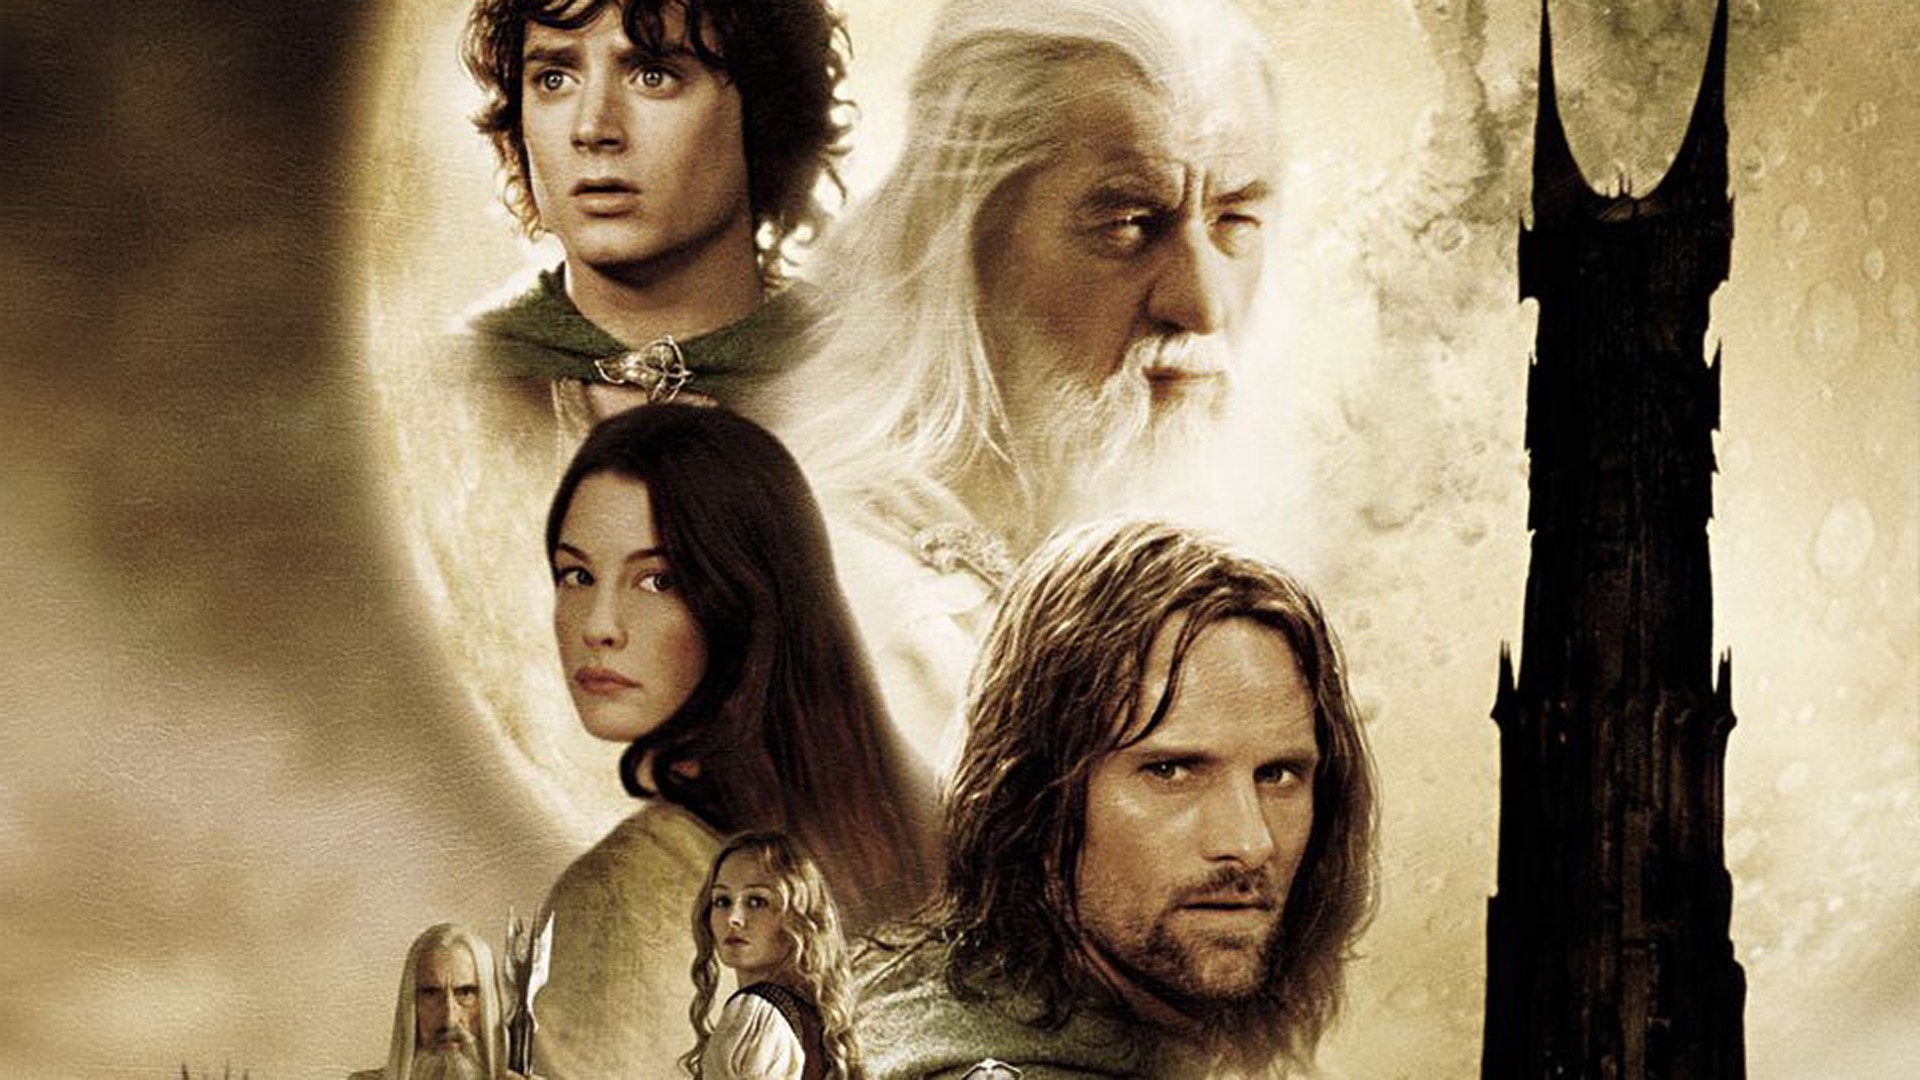 movies, The Lord Of The Rings, The Lord Of The Rings: The Two Towers, Frodo Baggins, Gandalf, Aragorn, Arwen, Éowyn, Saruman, Ian McKellen, Viggo Mortensen, Elijah Wood, Liv Tyler, Christopher Lee Wallpaper